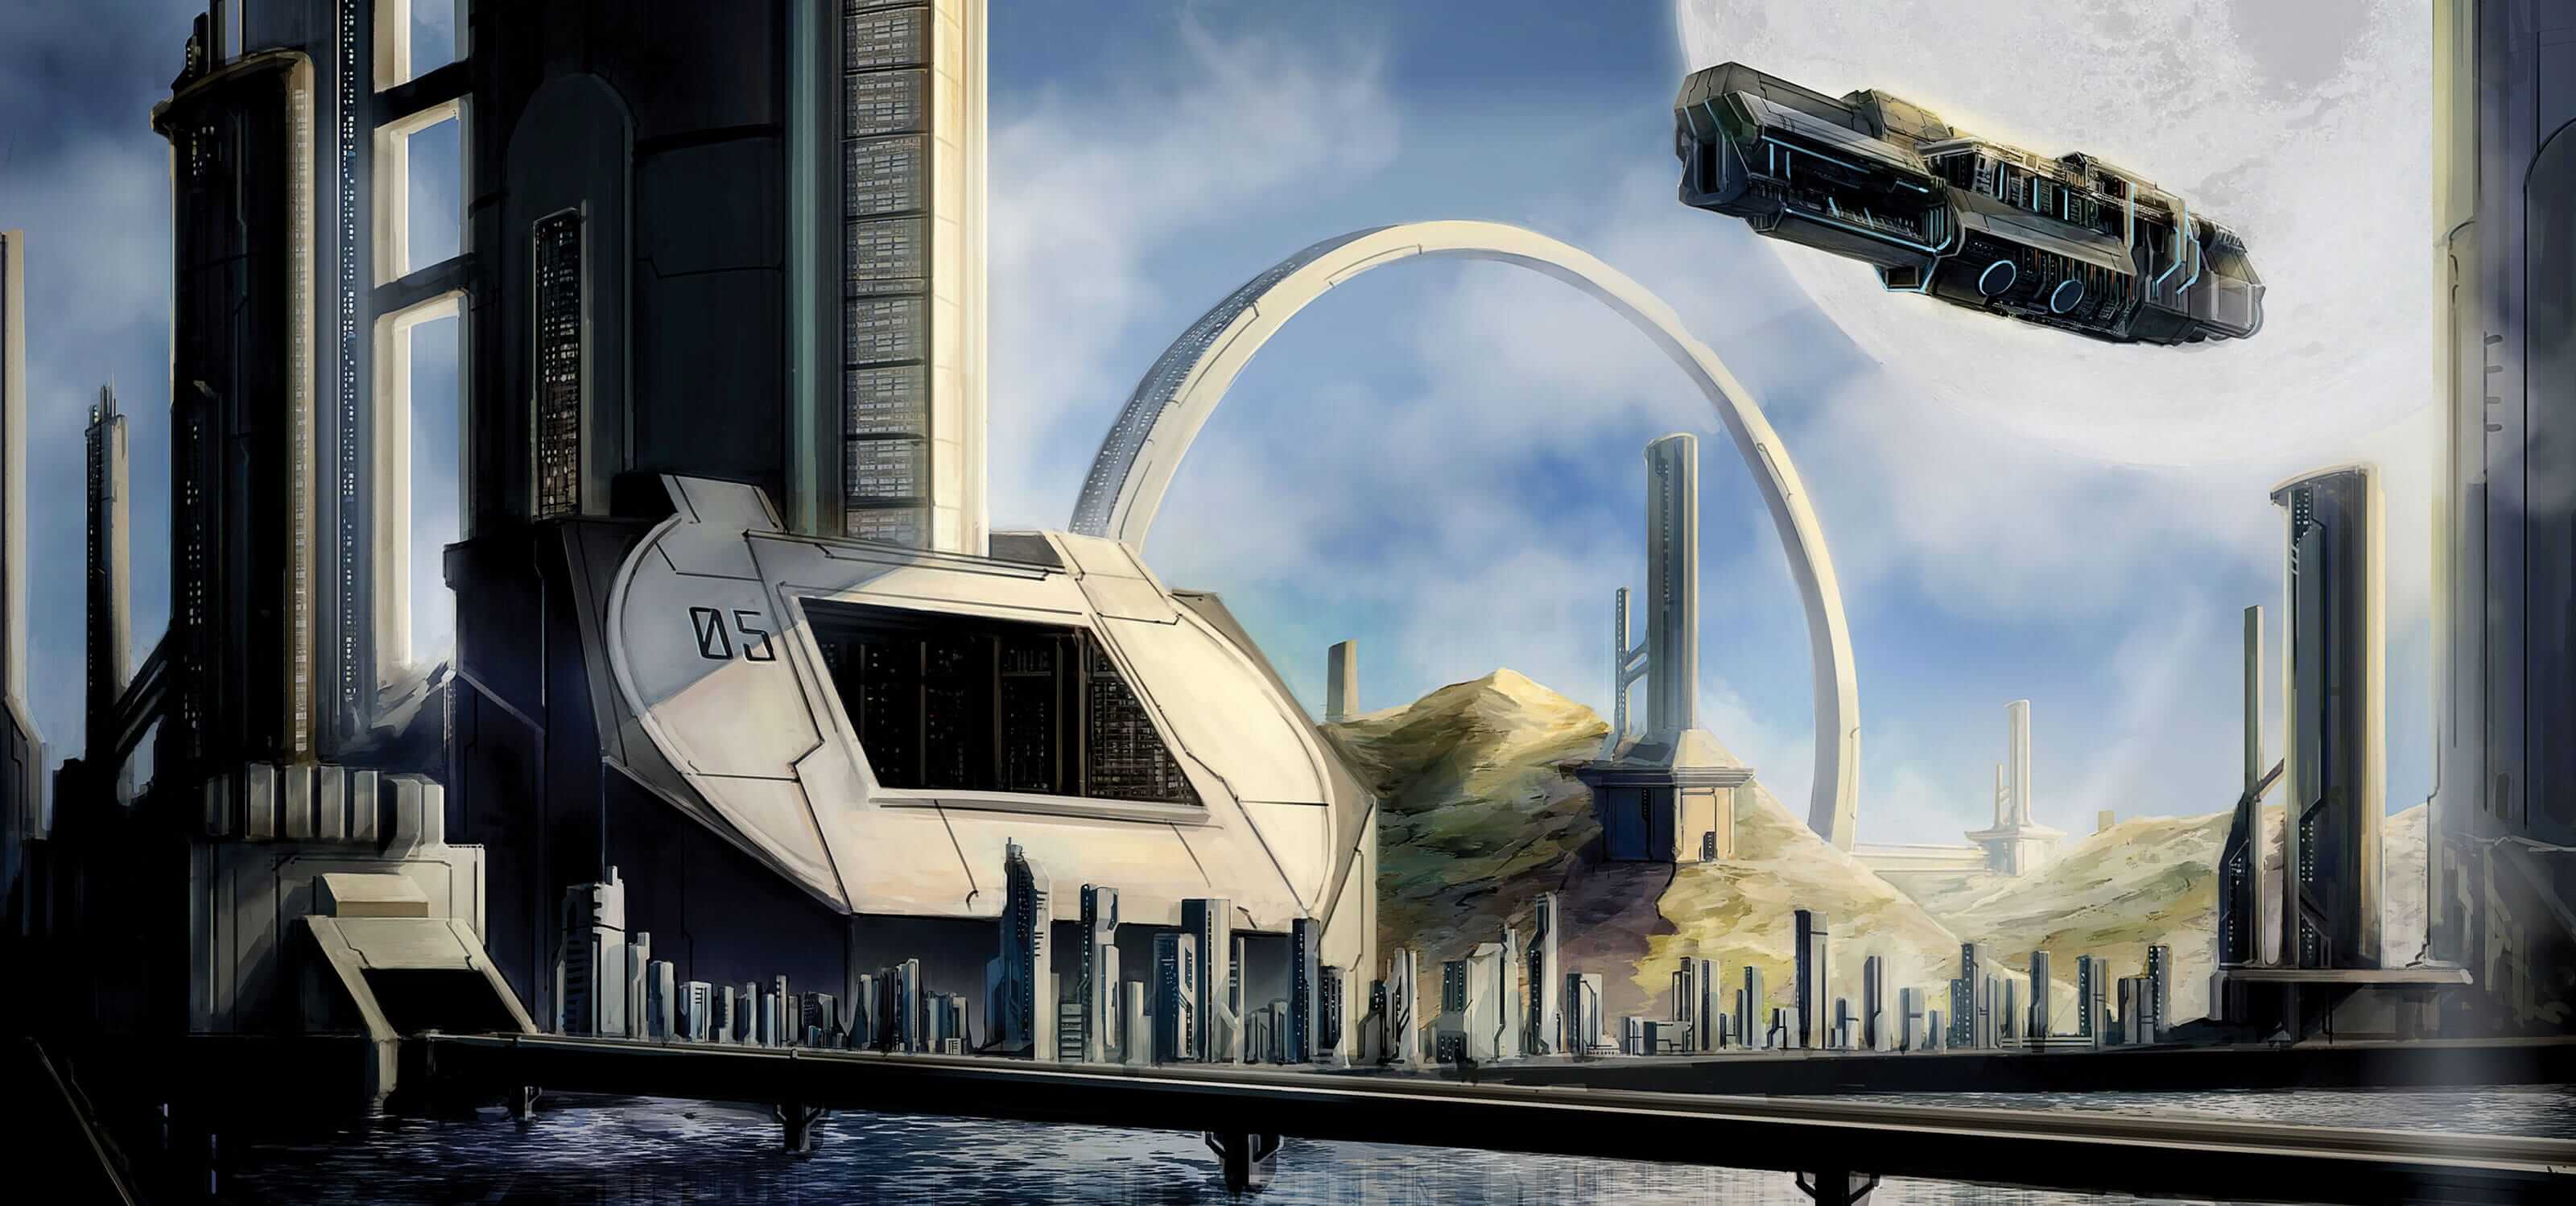 Digital painting of a futuristic city landscape with a large transport spaceship flying over the harbor